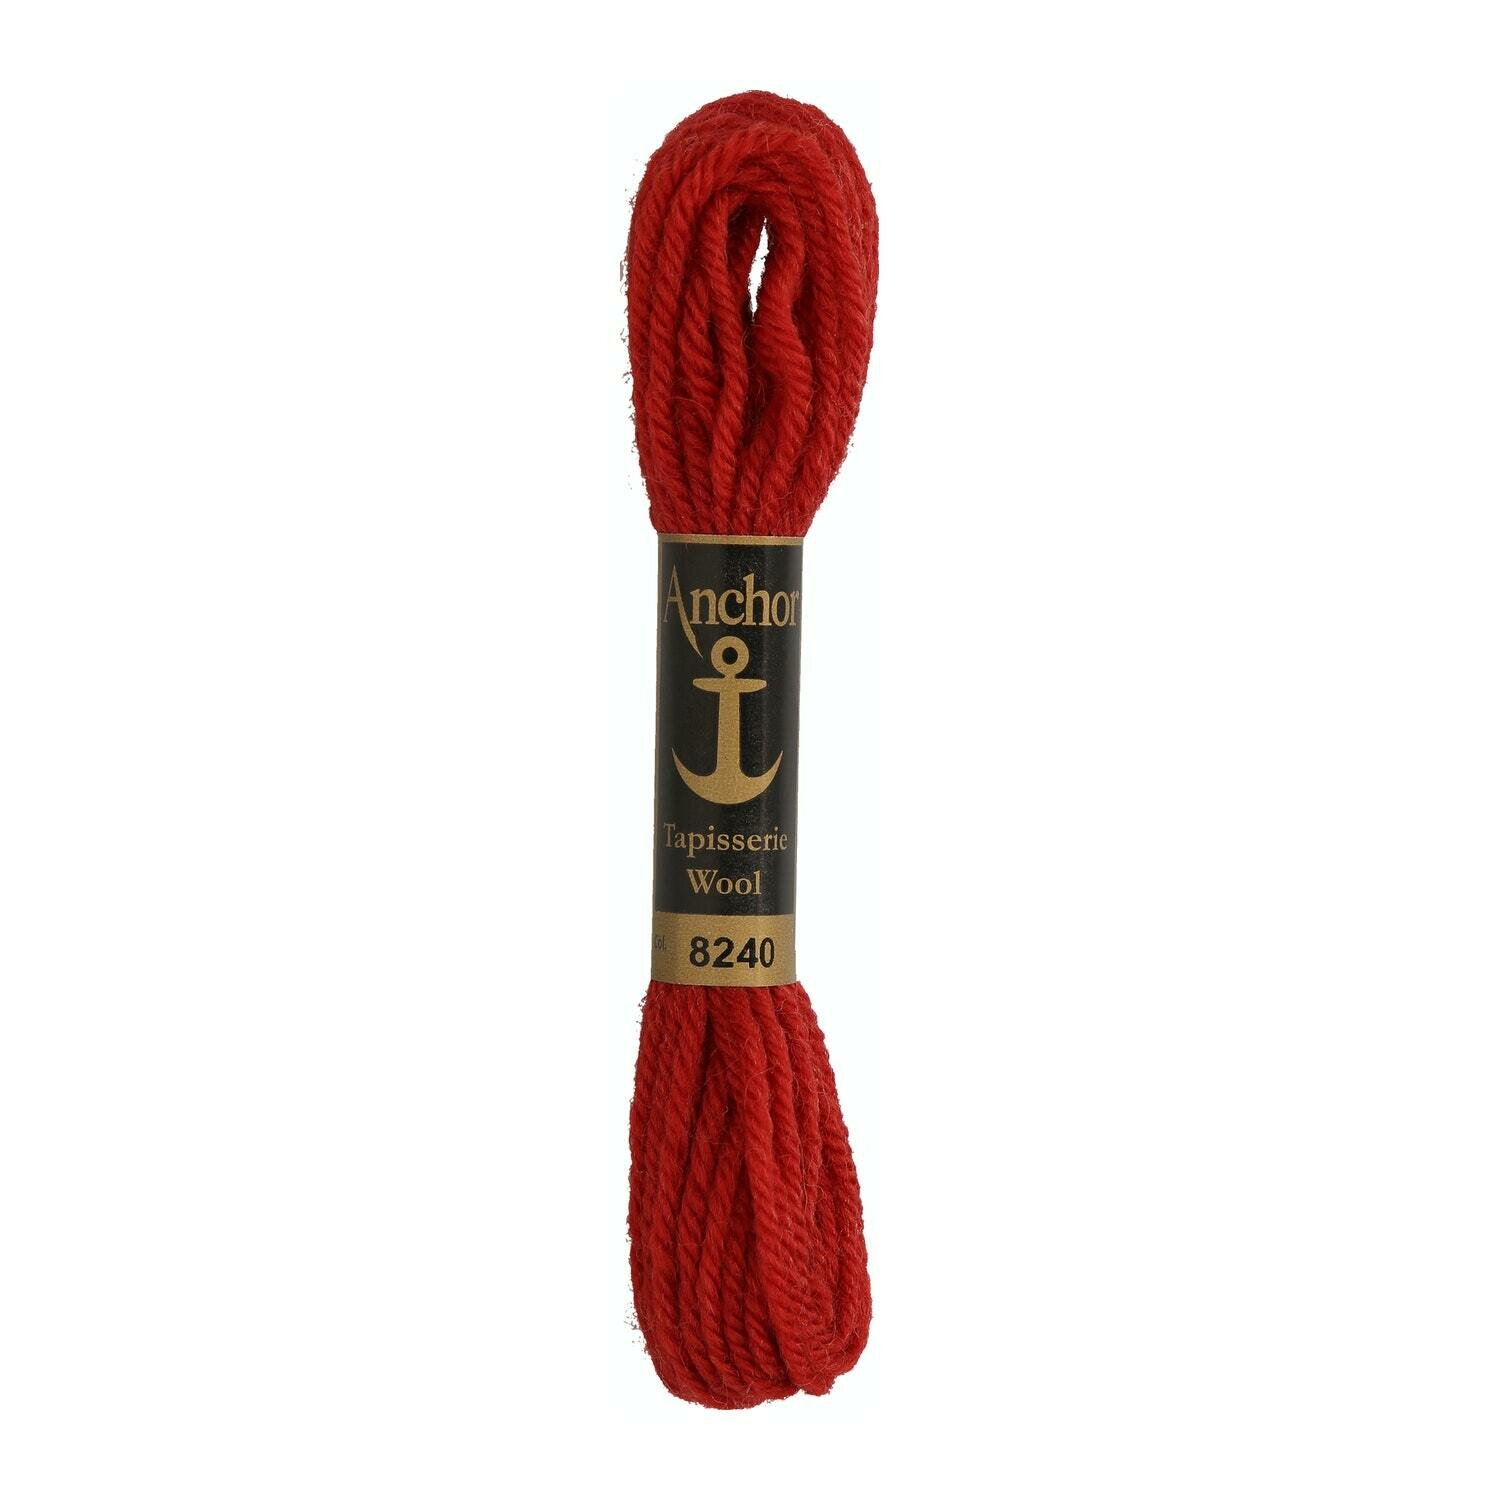 Anchor Tapisserie Wool # 08240